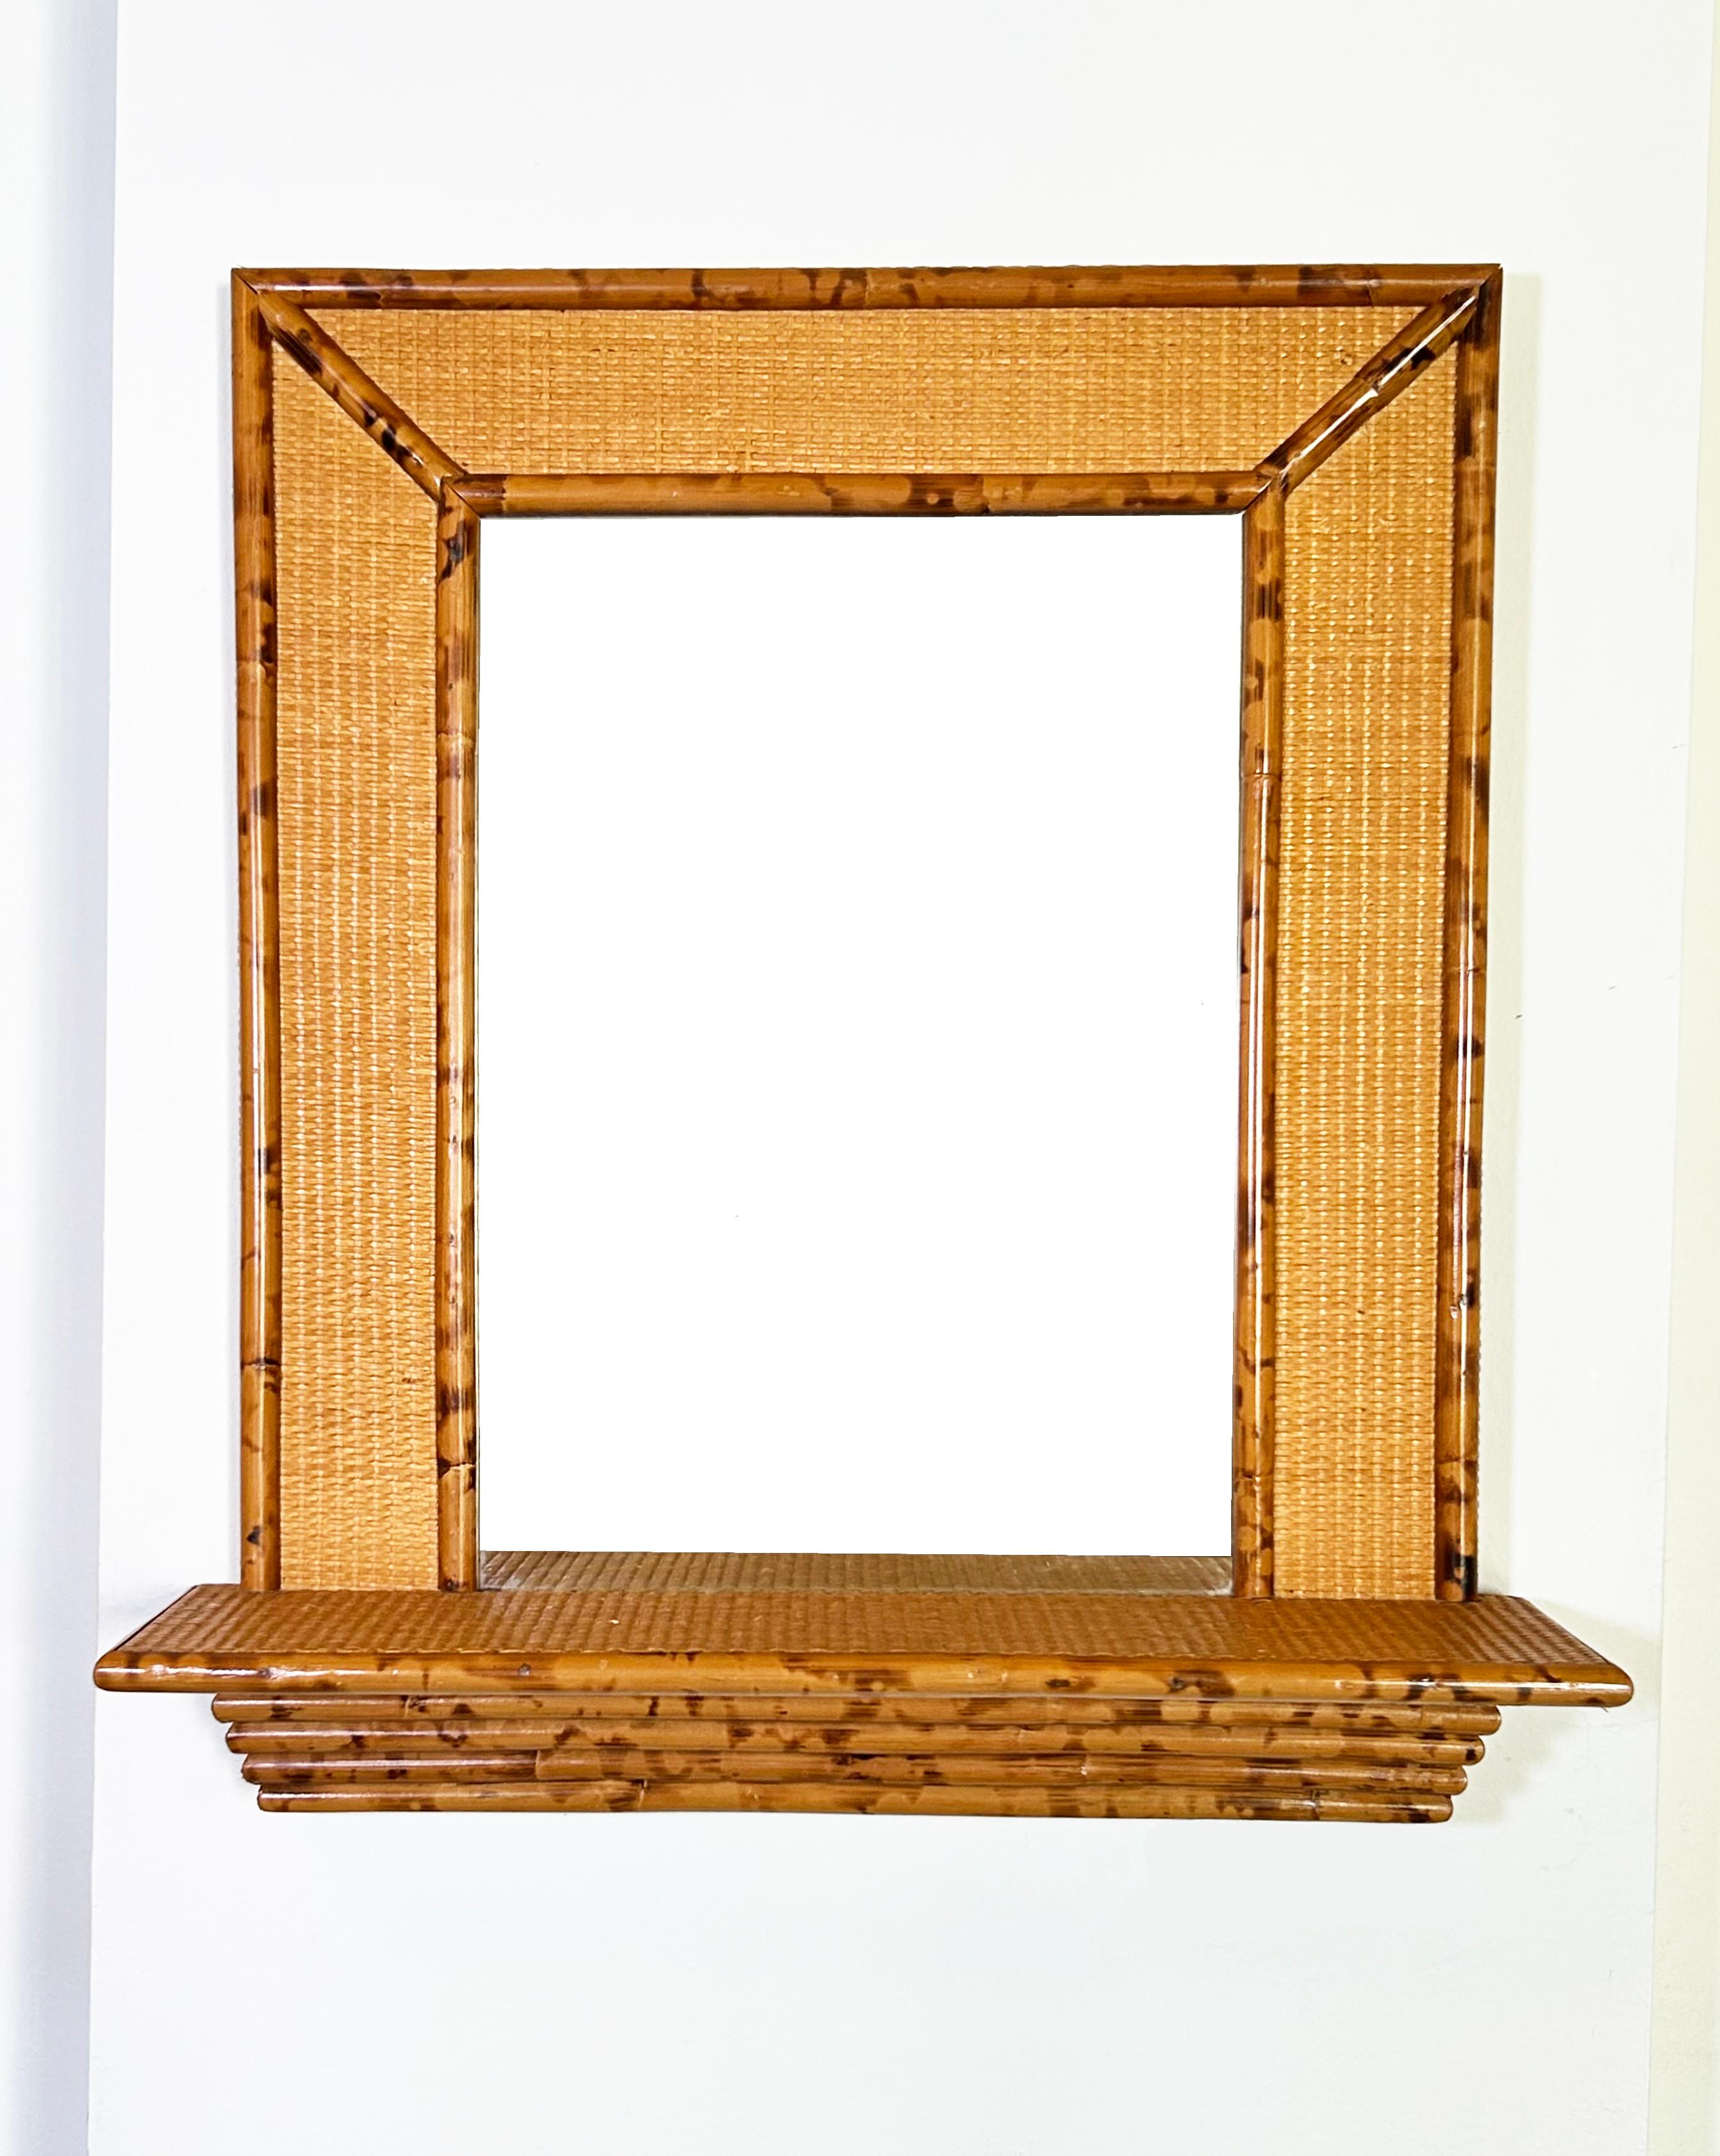 1970s wall mirror with a console shelf, all made of bamboo and rattan.
The frame measures 24